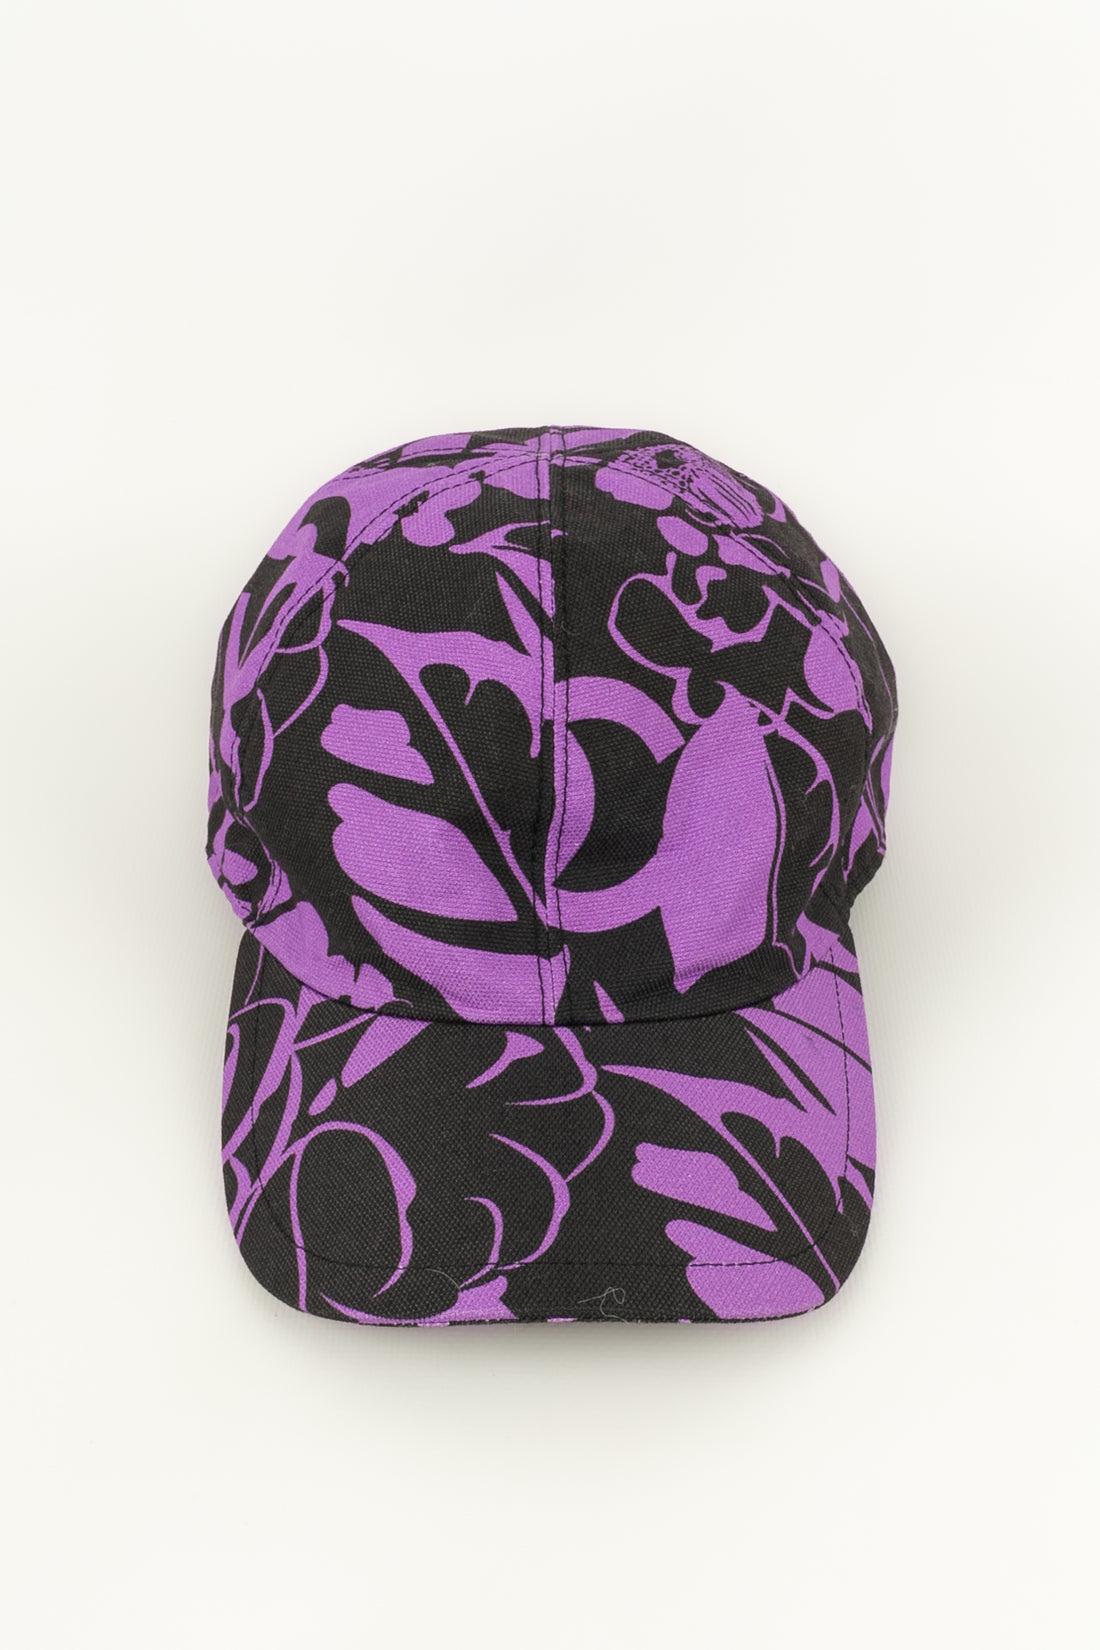 Chanel - (Made in Italy) Set composed of an adjustable cap and a cotton pareo in purple and black tones. The pareo has a small storage bag.
Collection Coco beach 2021.

Additional information: 
Dimensions: Single-size
Condition: Very good